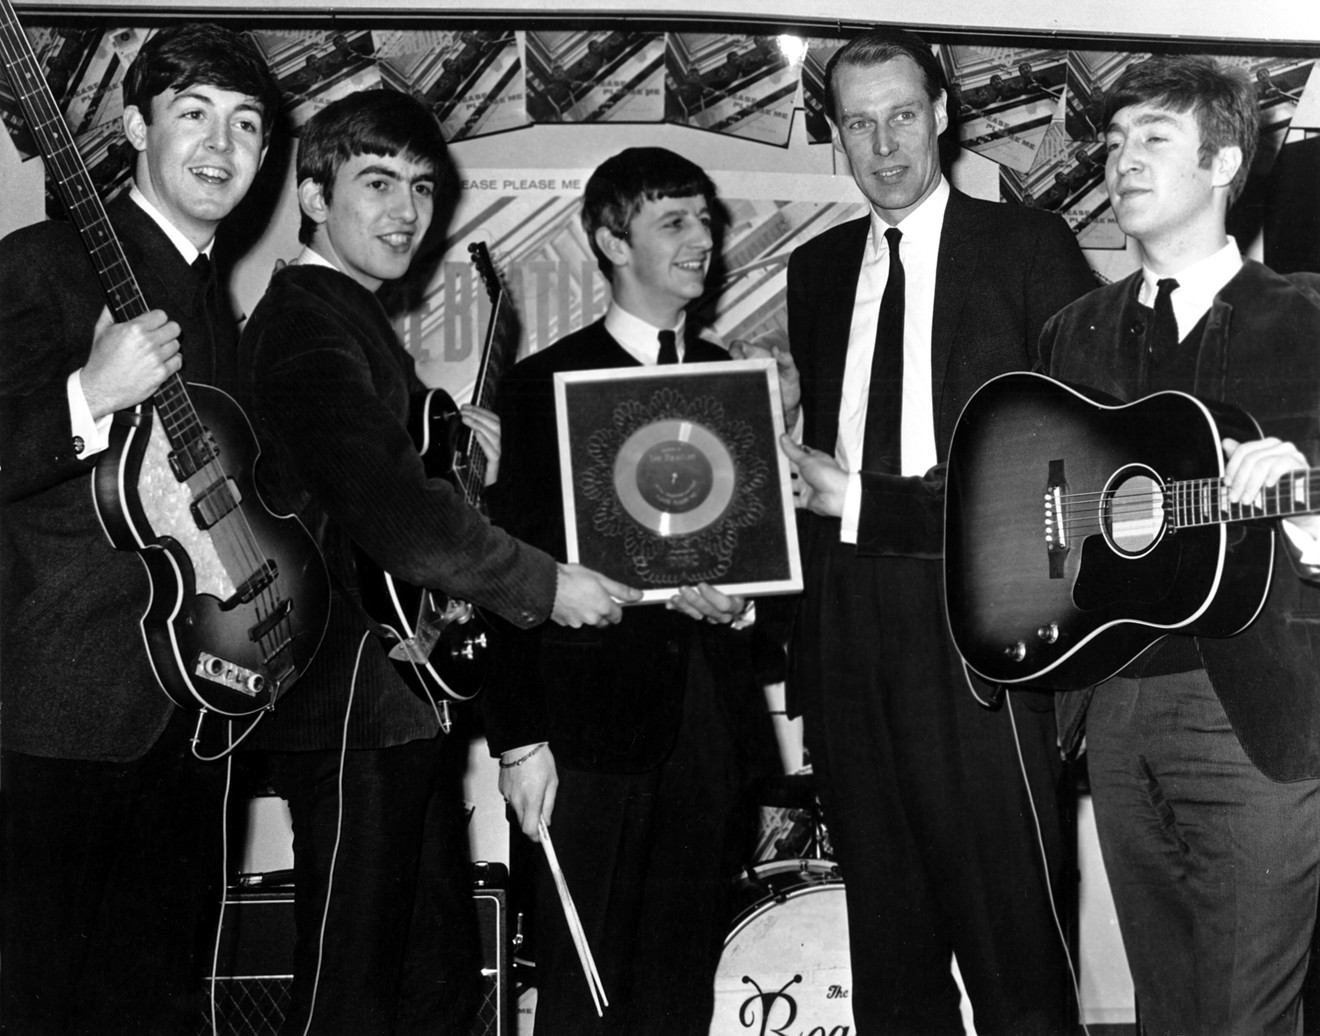 George Martin (second from right) and the Beatles pose with gold discs. In 1963 alone, Martin's acts held the No. 1 spot on the UK charts for 37 weeks.